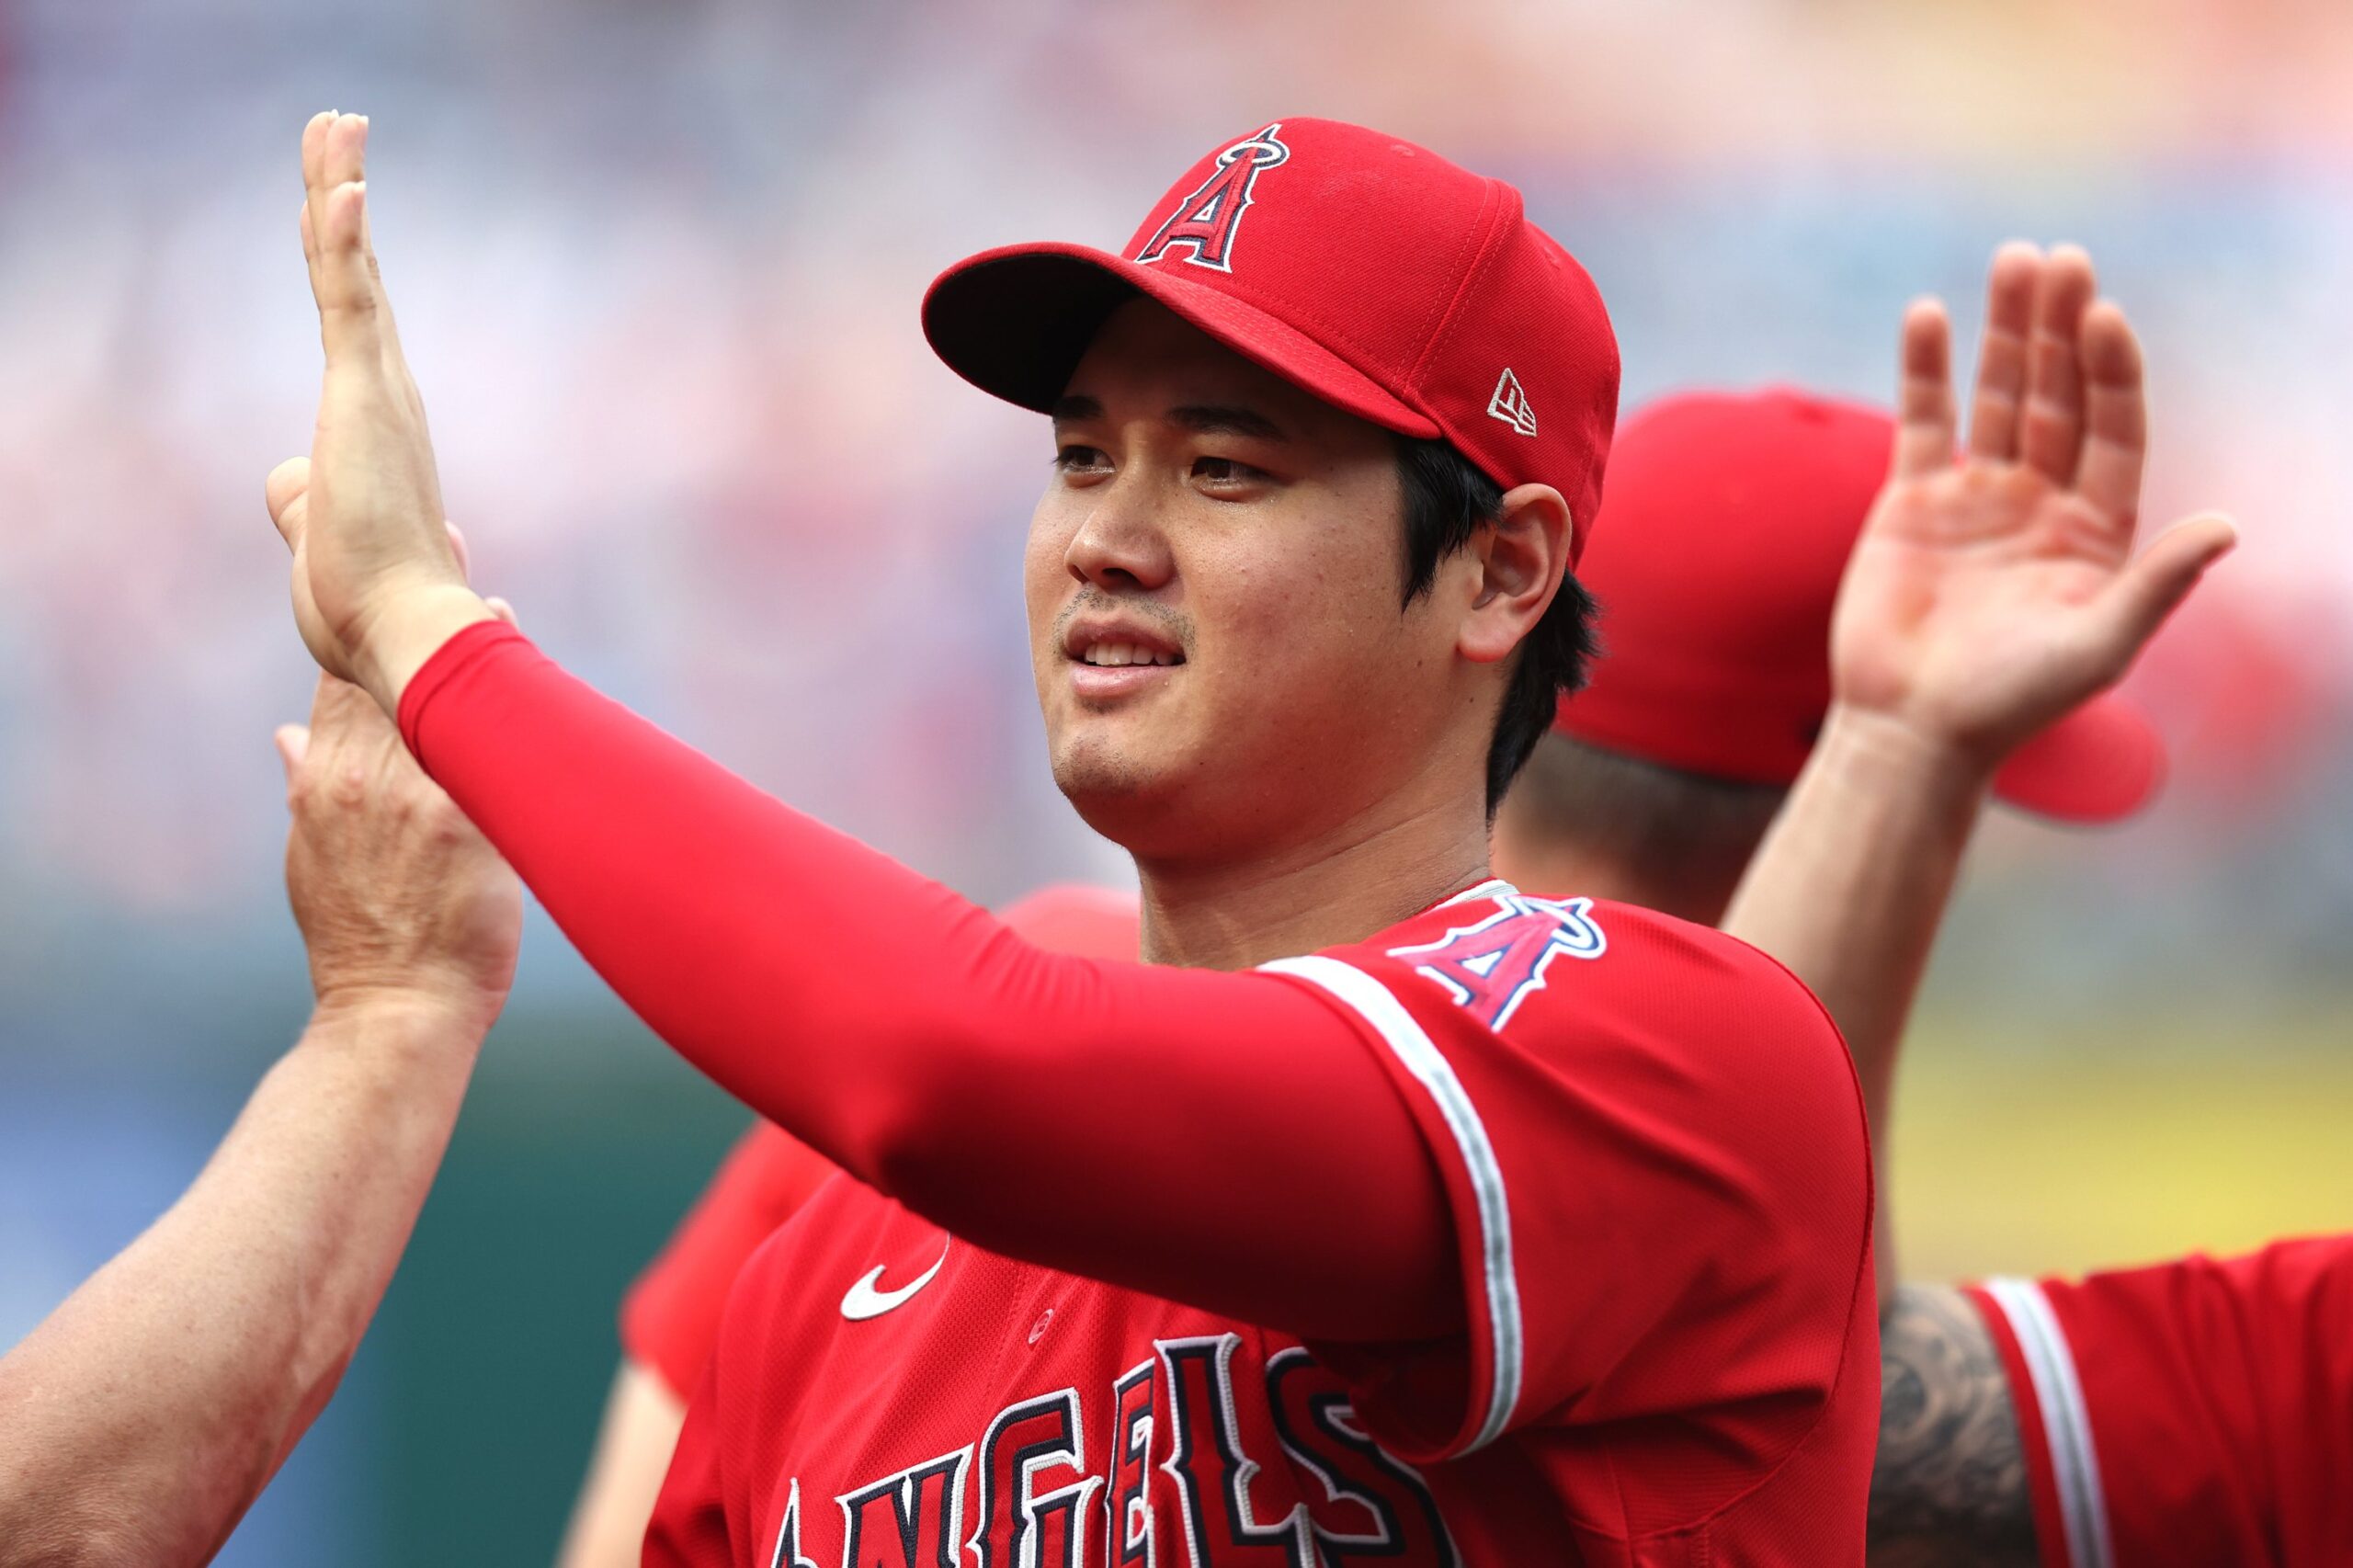 Ohtani set for WBC in Japan, but Angels future uncertain